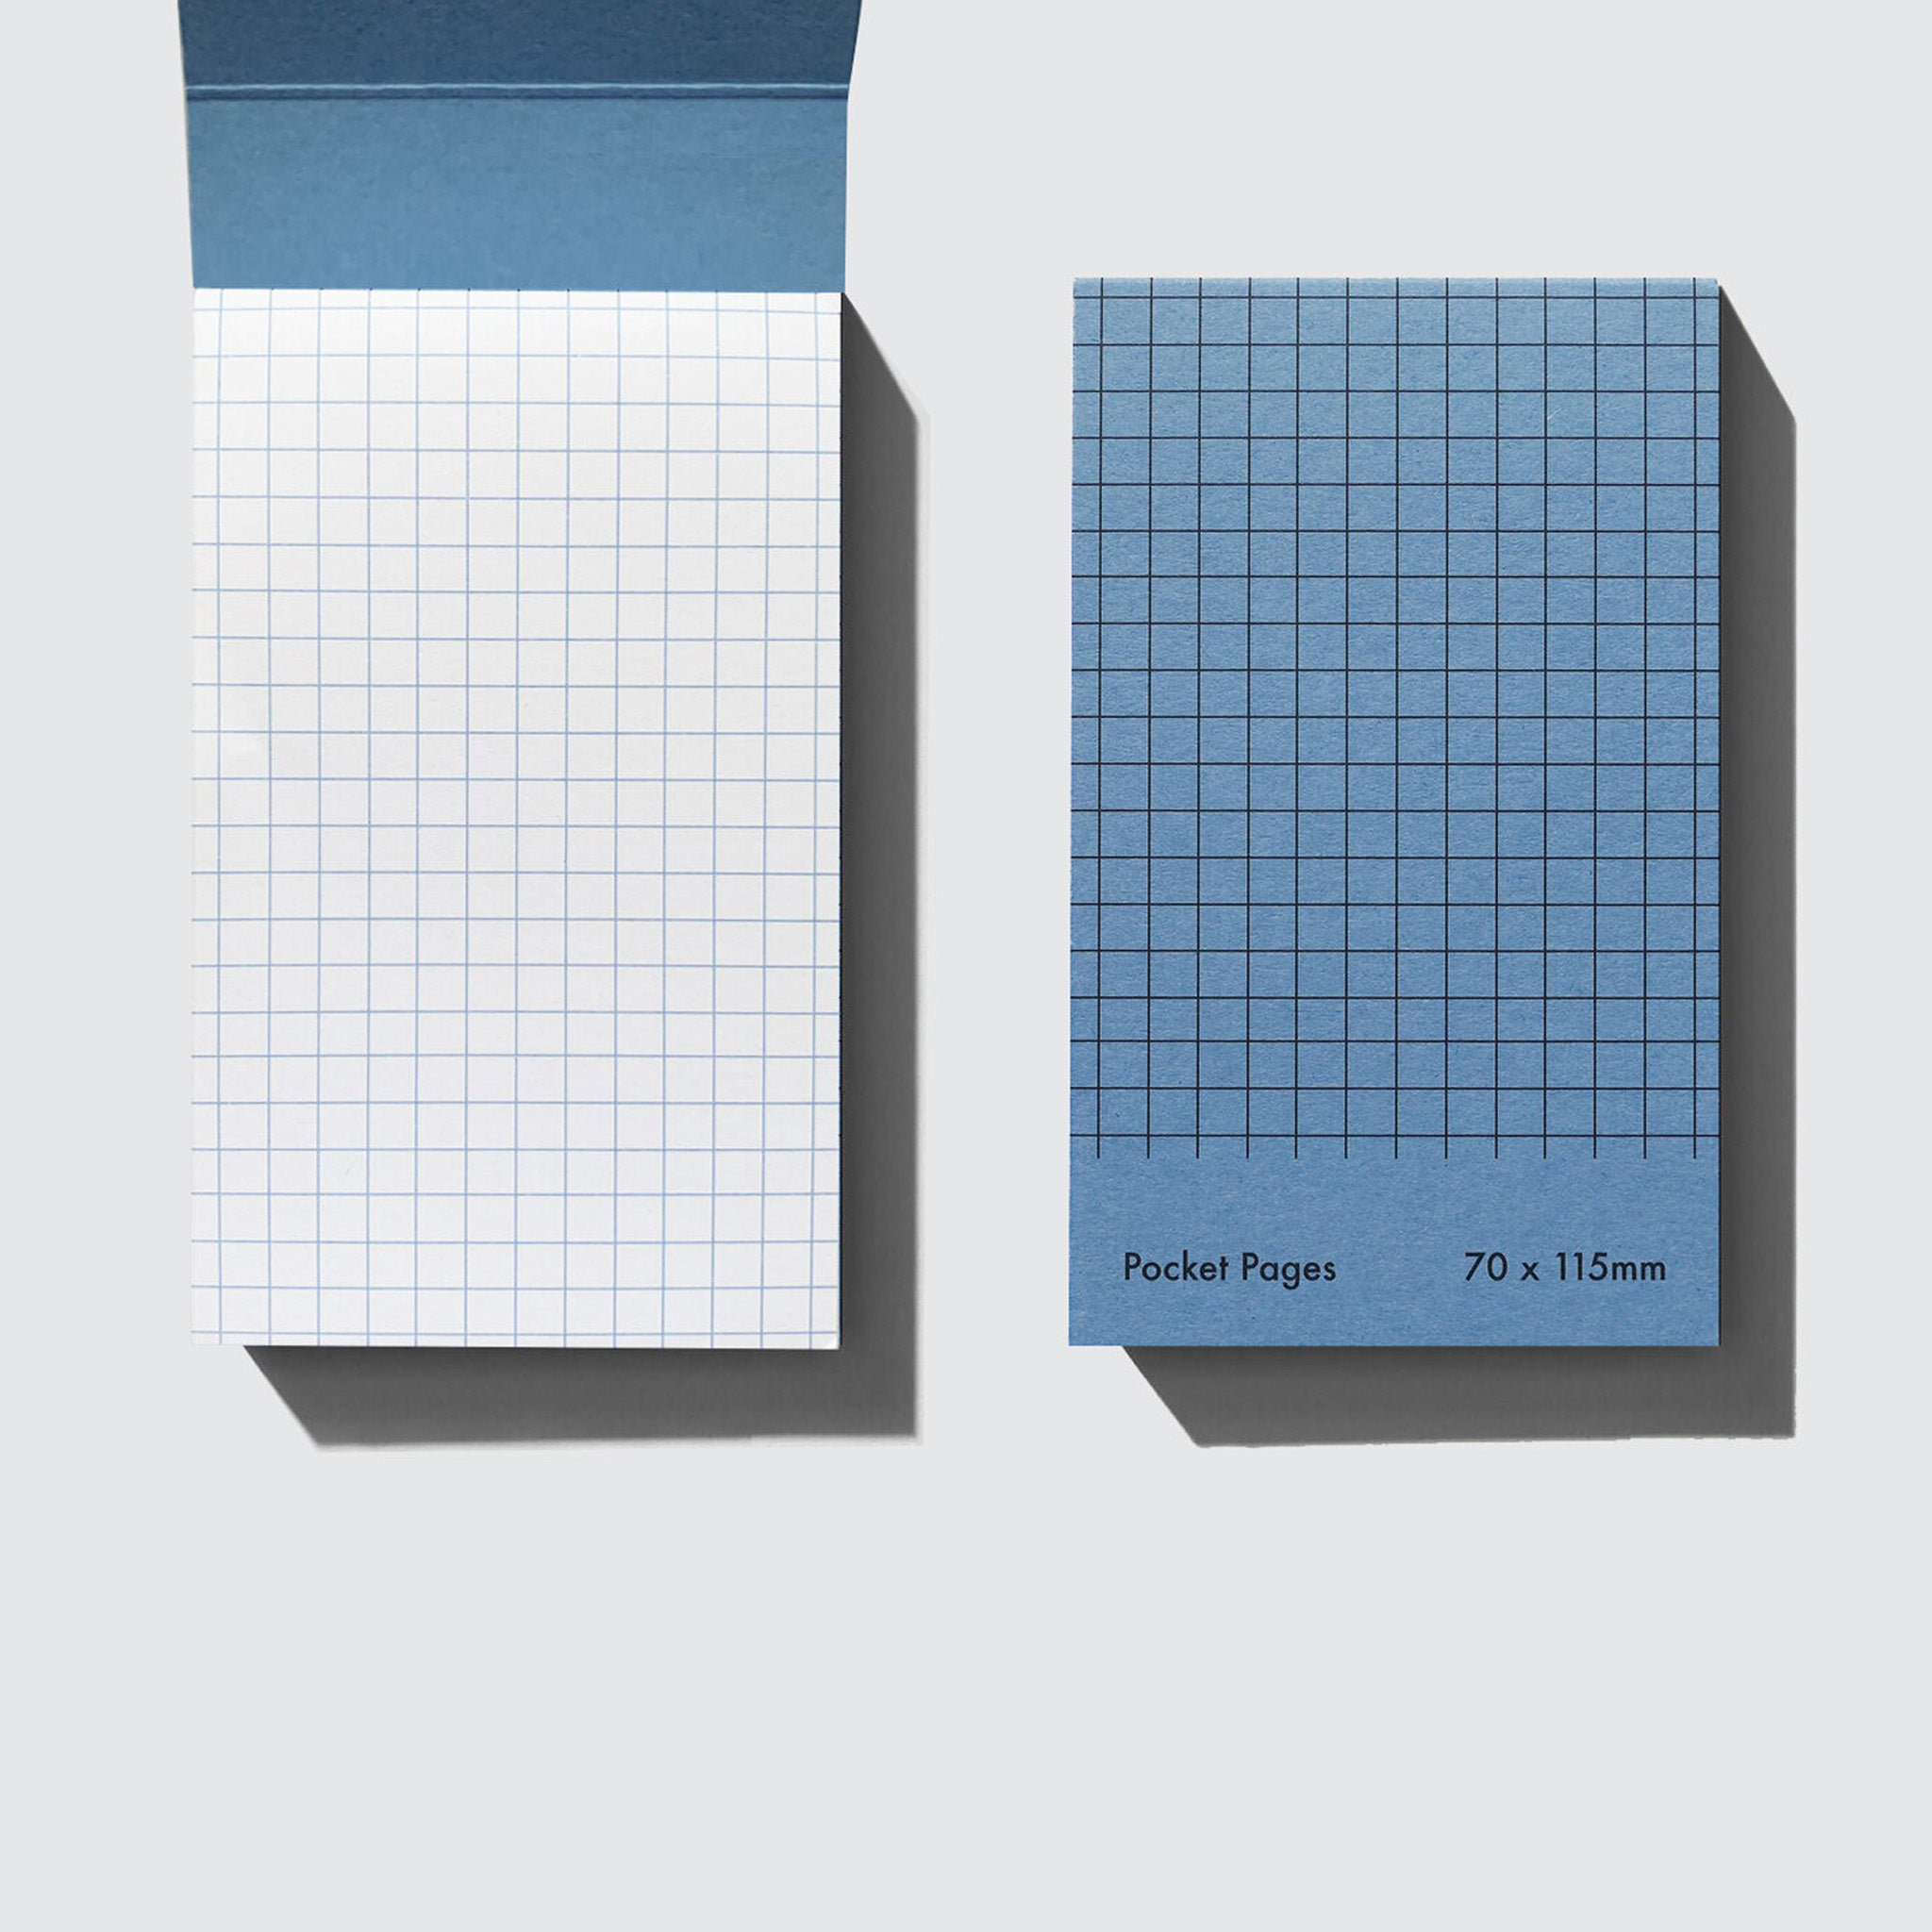 Pocket Pages Memo Pad by Scout Editions